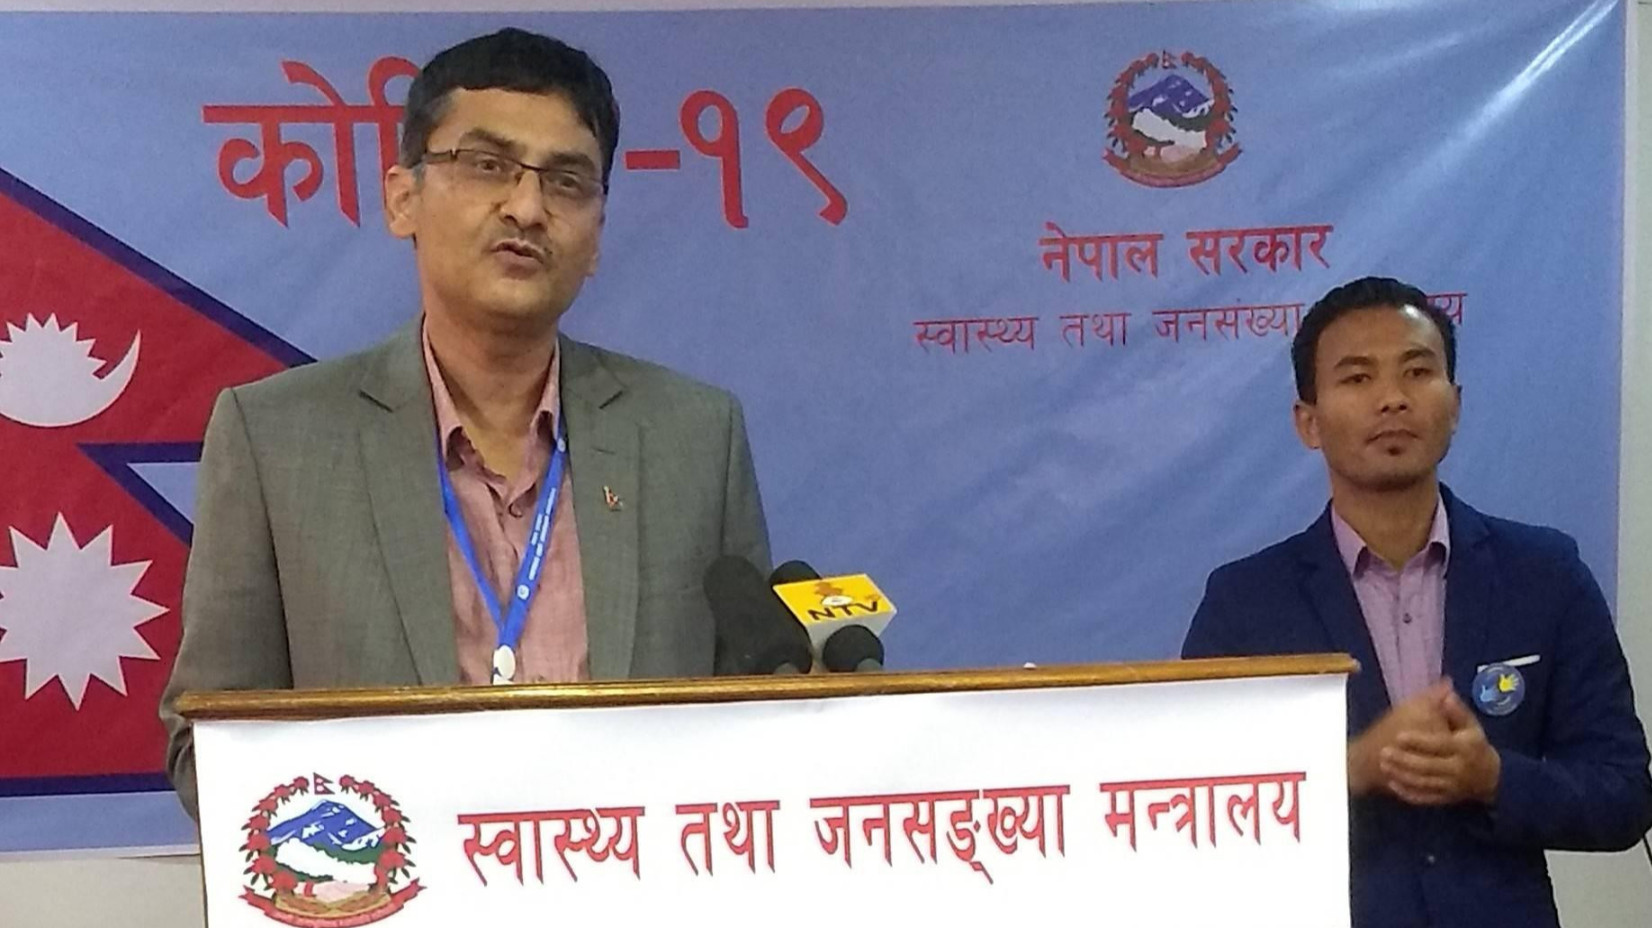 One more person tests positive for COVID-19 in Nepal